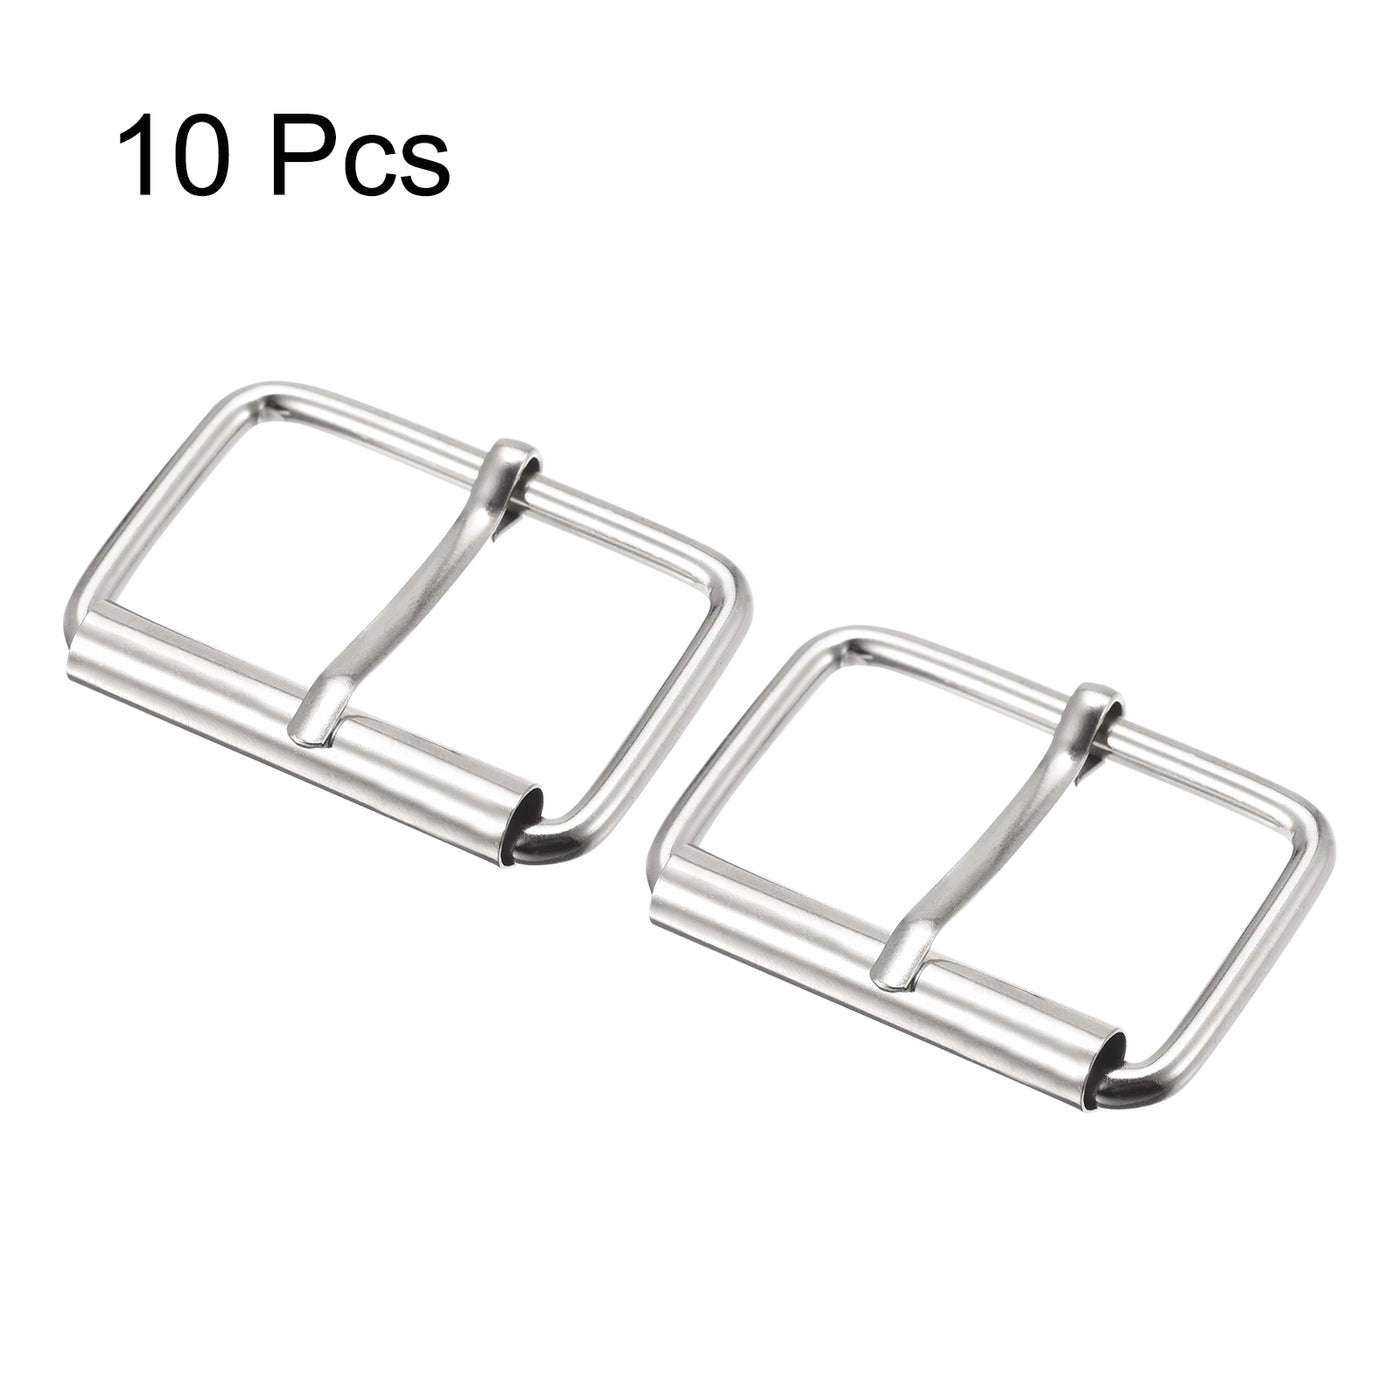 uxcell Uxcell 40mm(1.57") Metal Roller Buckles for Belts Bags Straps DIY Silver Tone 10pcs